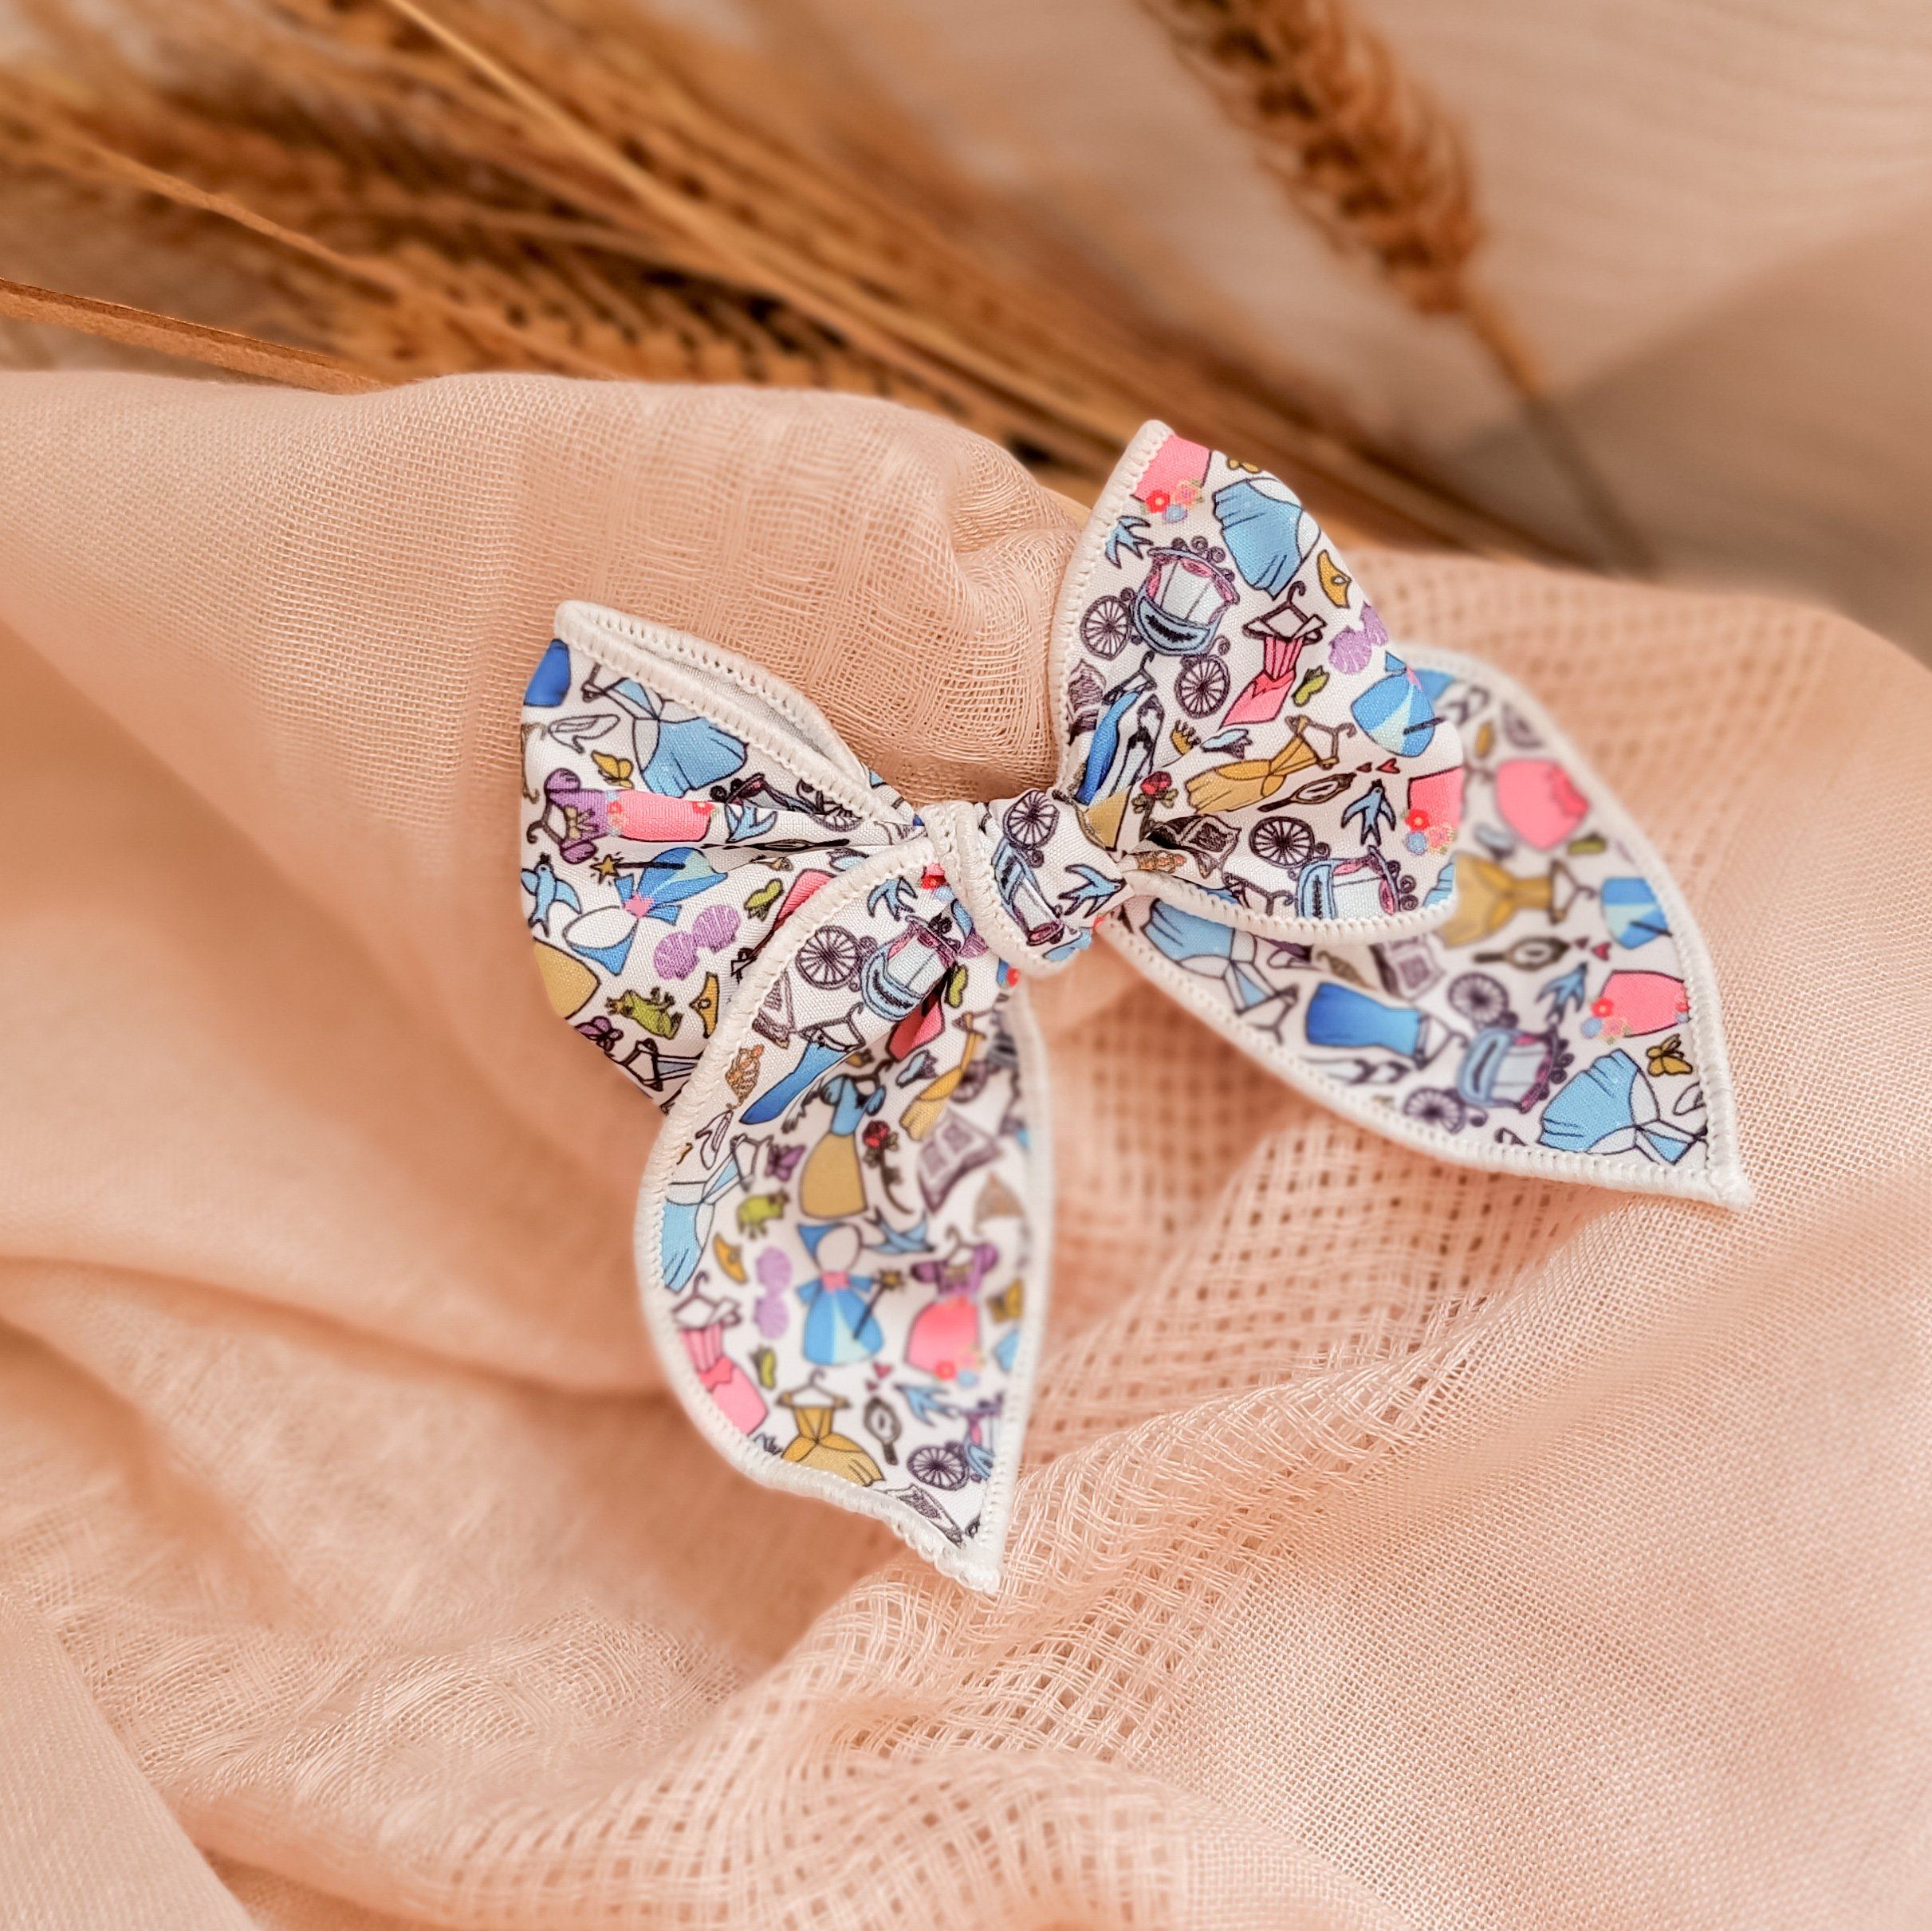 WHIMSY BOW // PRINCESS DRESS UP - Elisa’s Little Blossoms 